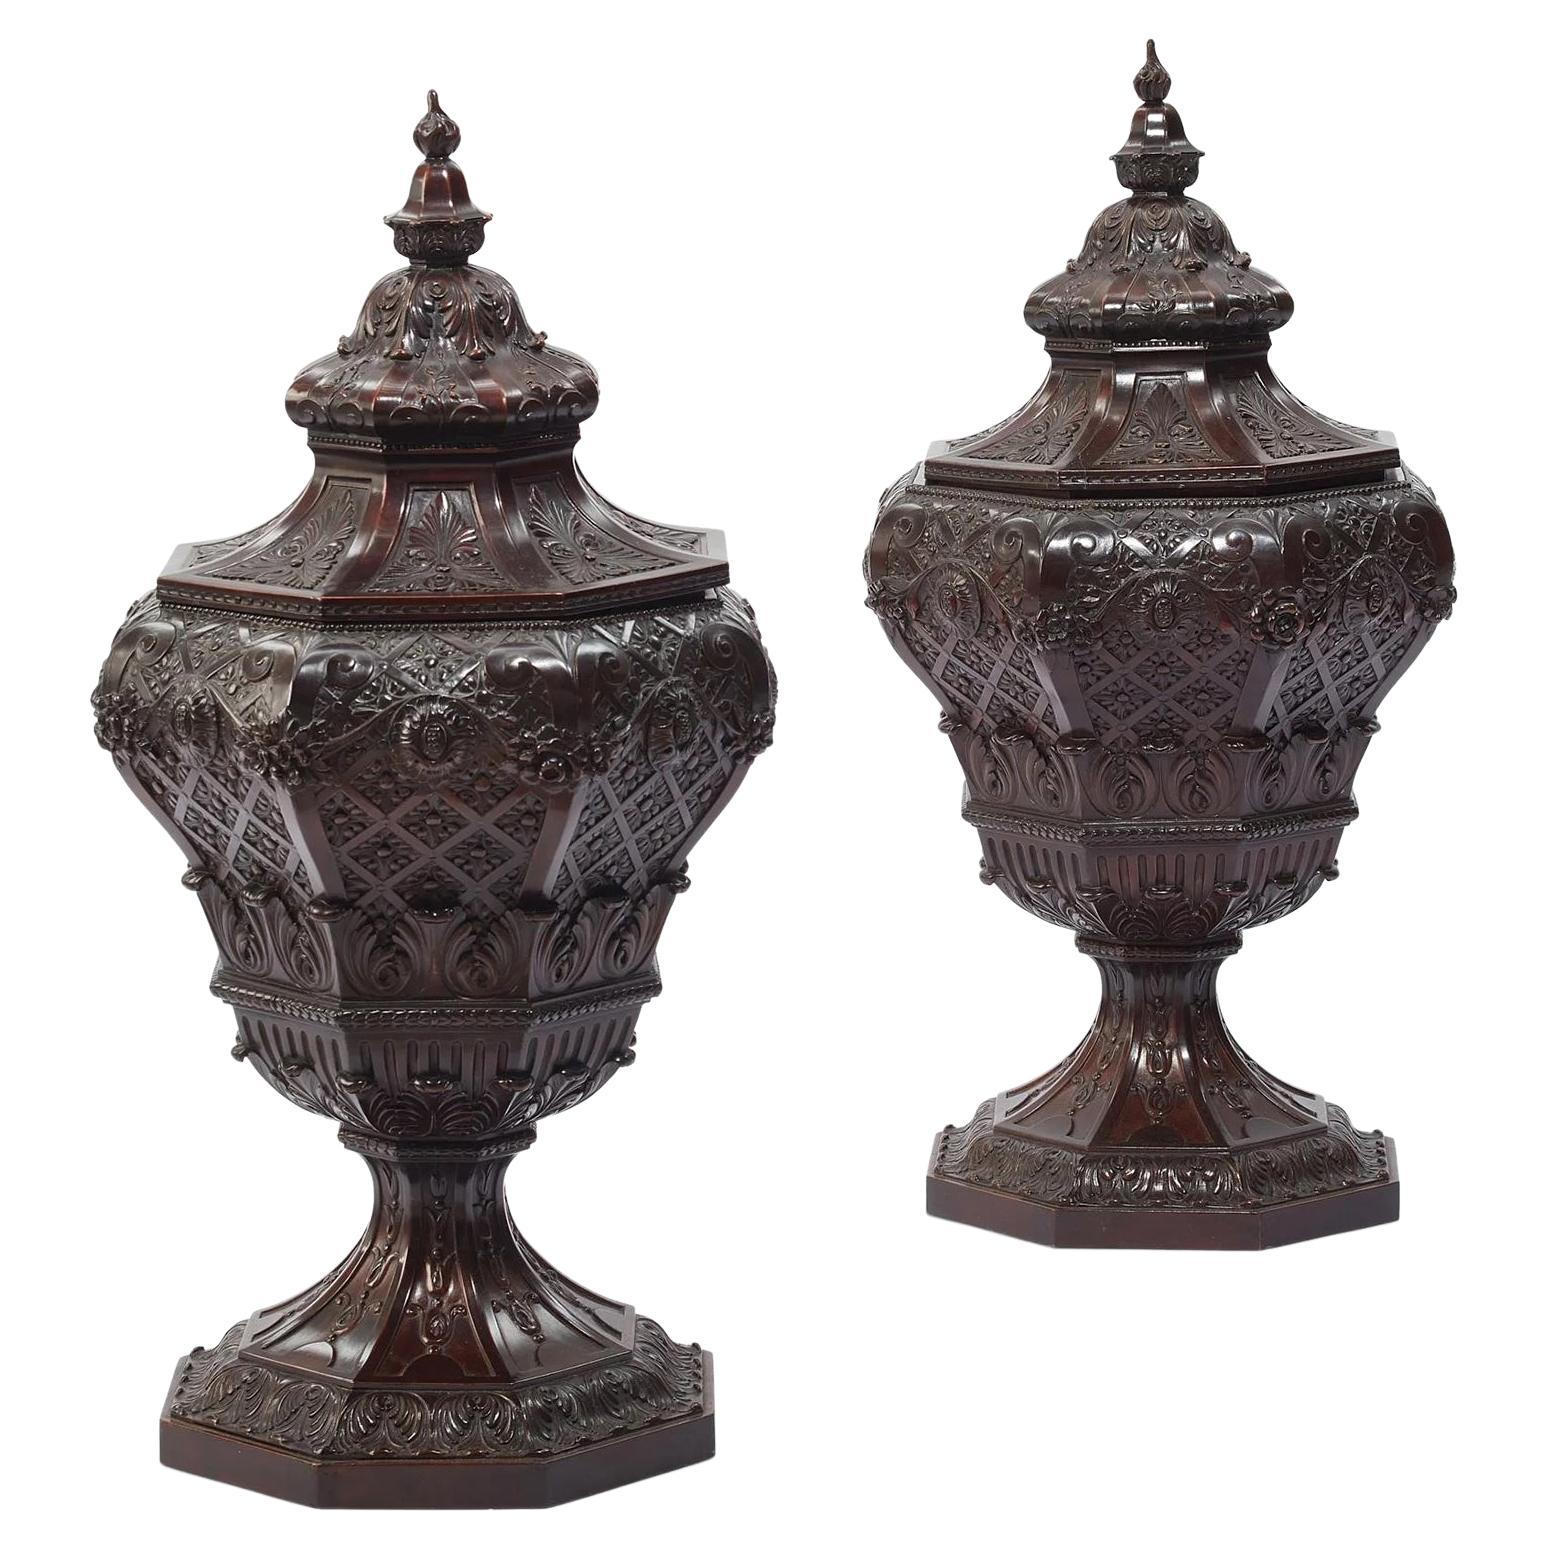 Pair 19th Century Regency Style Carved Mahogany Cellarette Urns or Wine Coolers